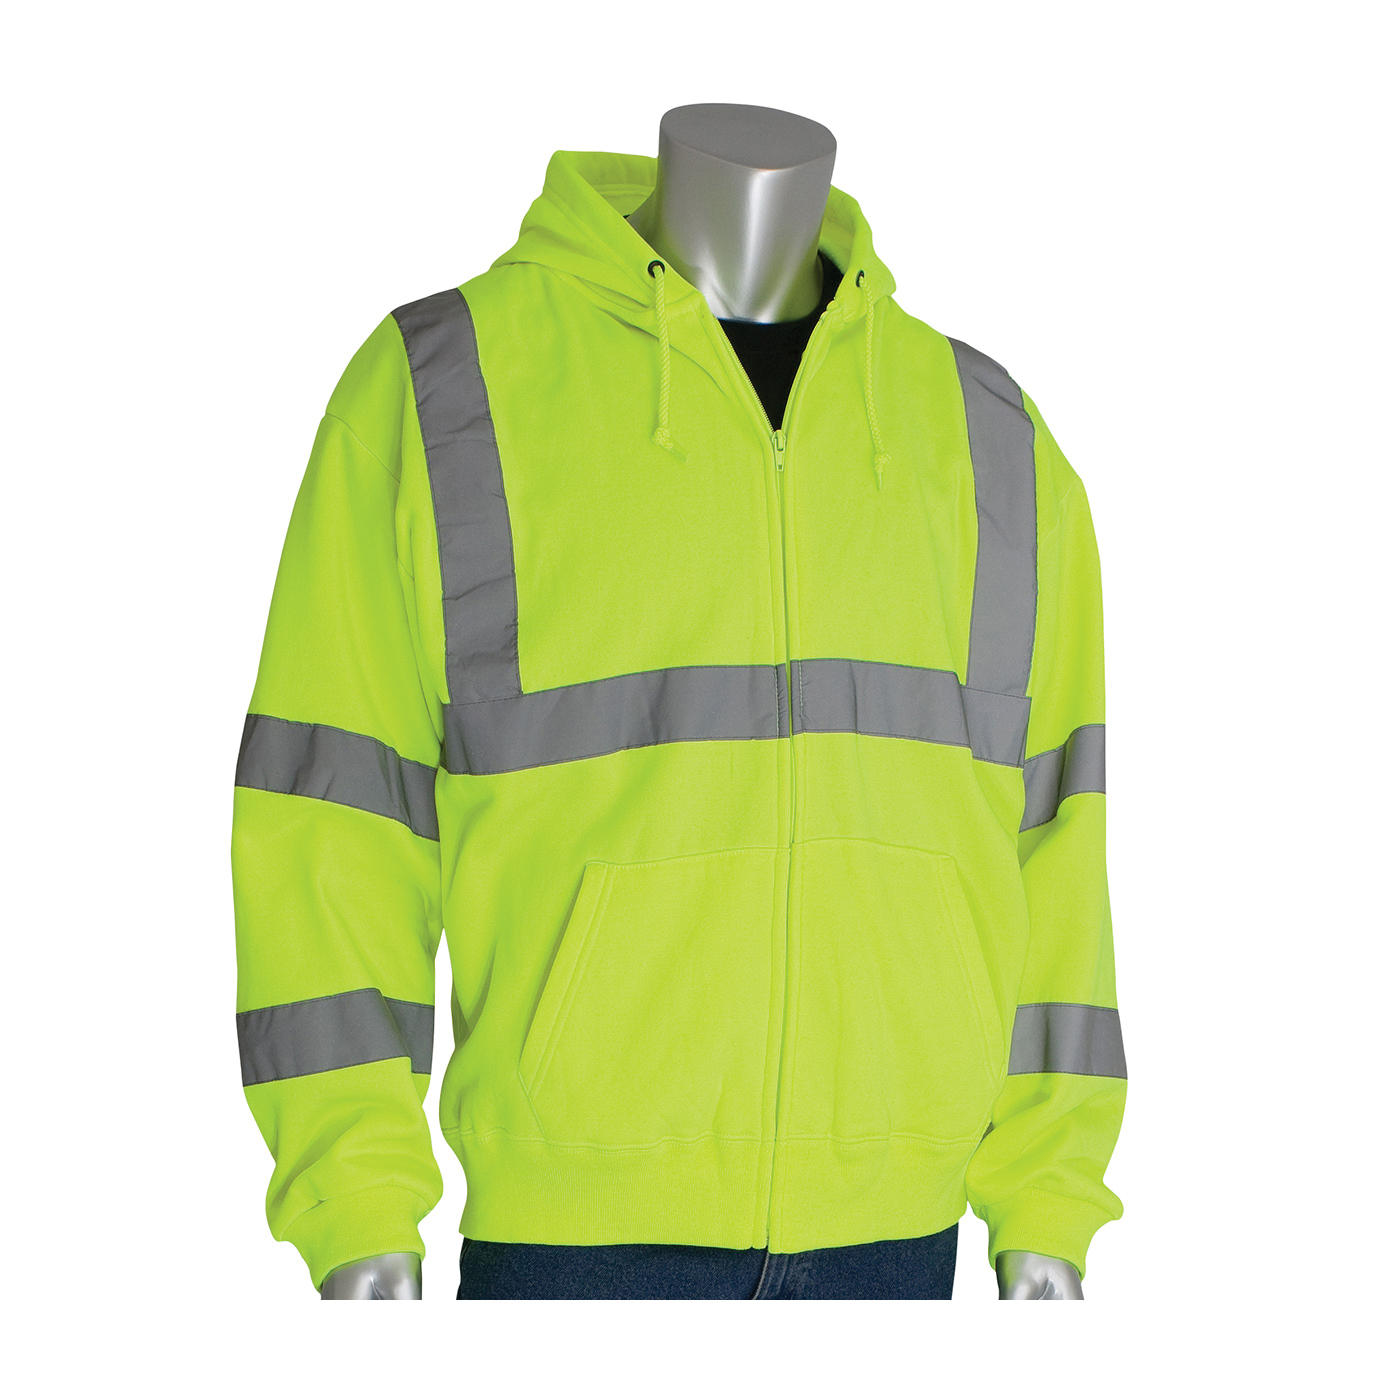 PIP® SafetyGear 323-HSSELY-5X Premium High Visibility Sweatshirt, 5XL, Yellow, Wicking Polyester, 31-1/2 in L